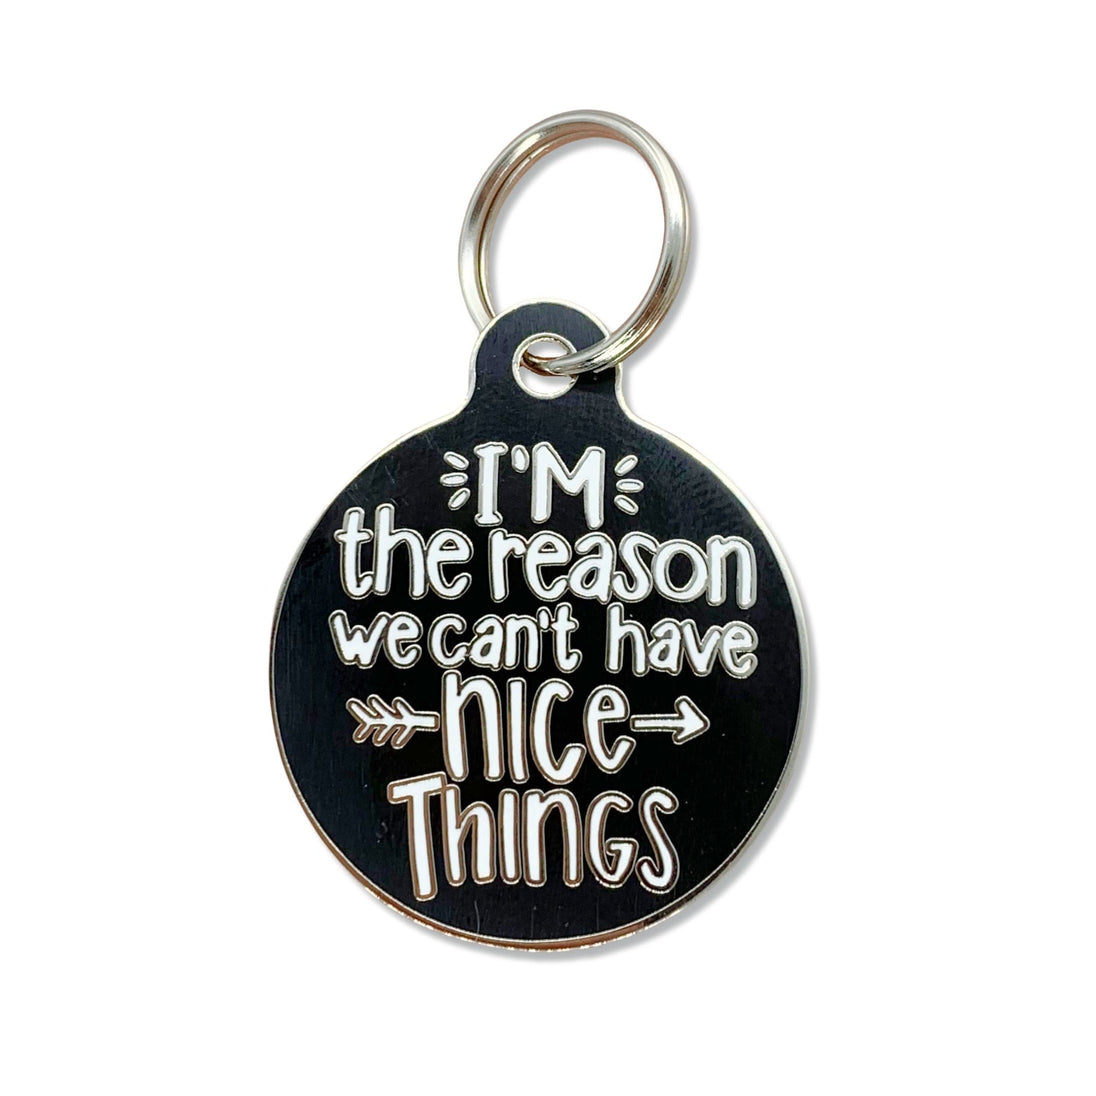 Bad Tags -Black Enamel Funny Dog Tag Charm - Can't Have Nice Things - Bulletproof Pet Products Inc